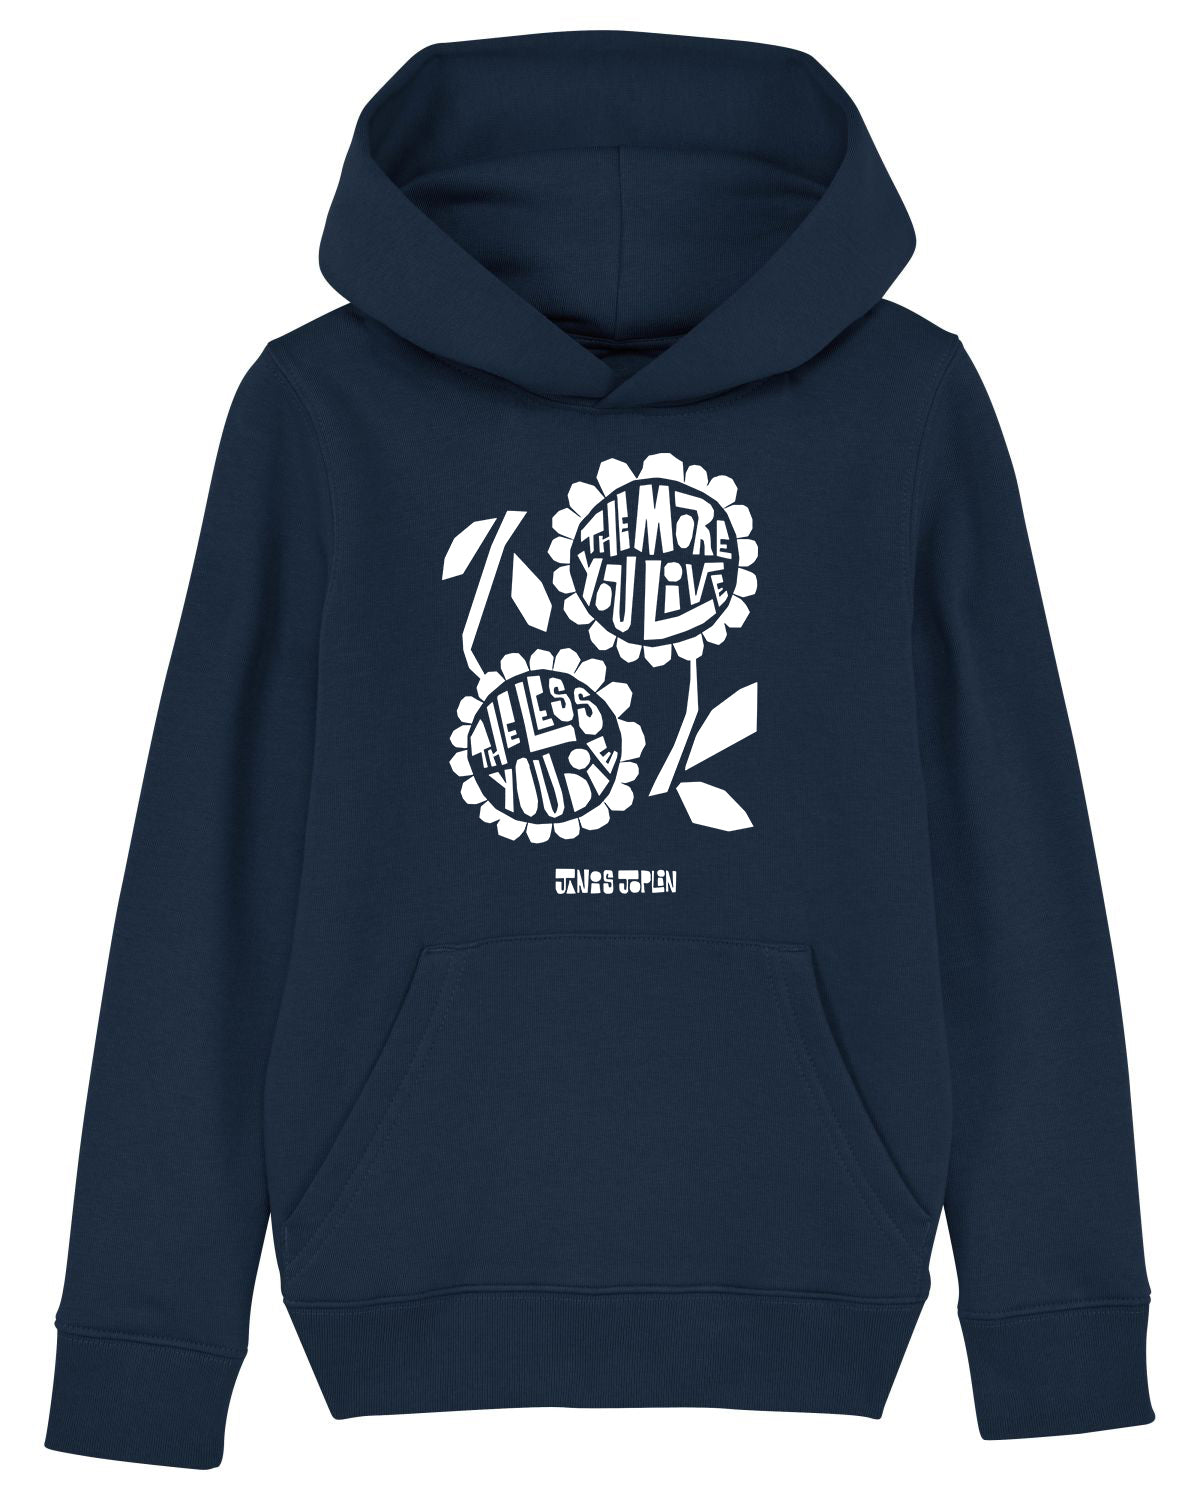 'The More You Live, The Less You Die' Organic Adult Unisex Hoodie